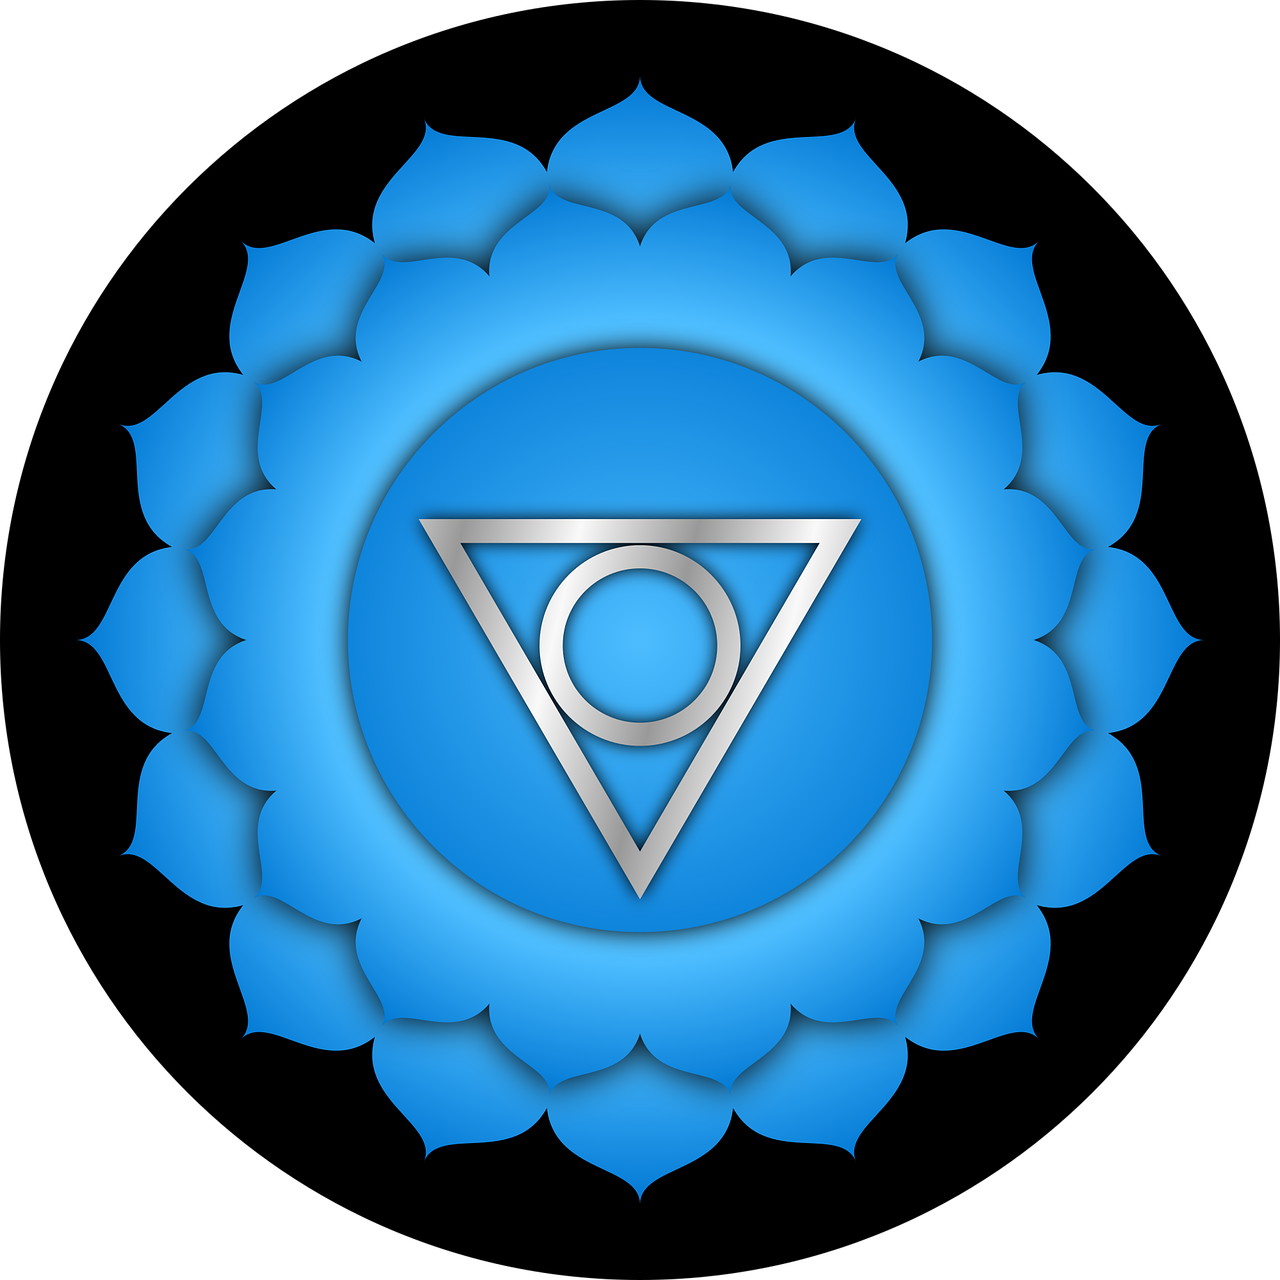 A bright blue symbol with sixteen petals and an inverted triangle with a circle in the middle.